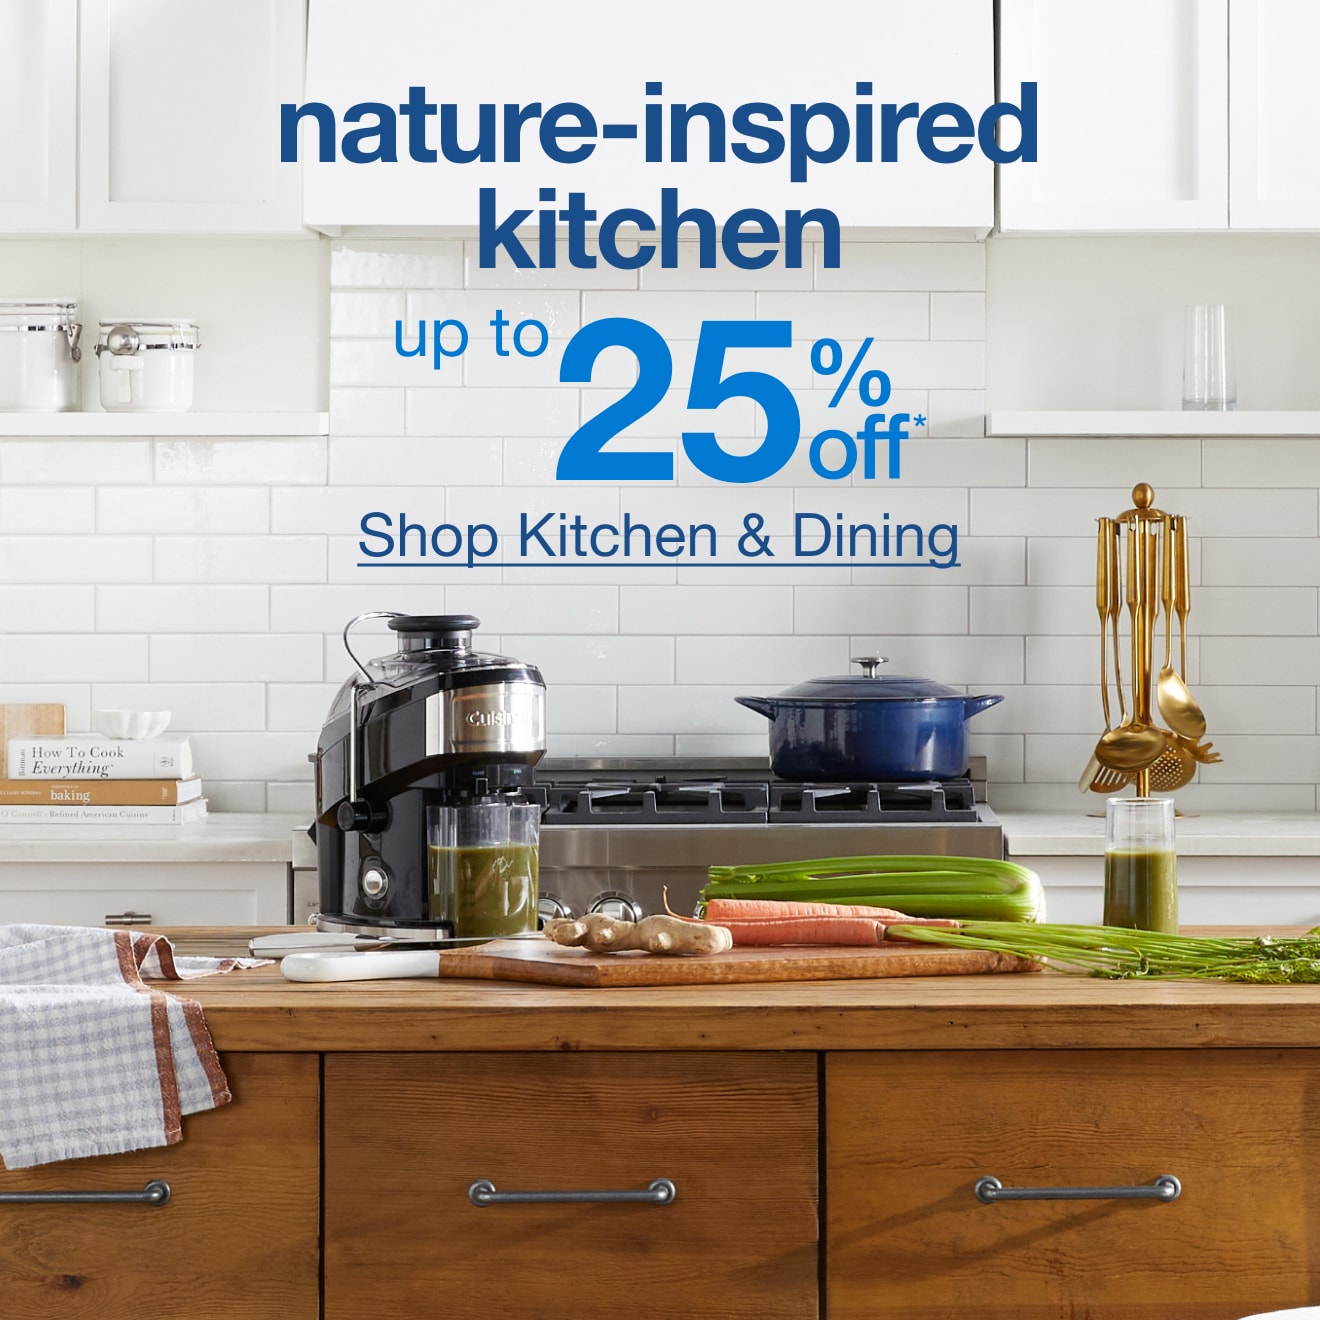 Up to 25% Off Nature-Inspired Kitchen - Shop Now!